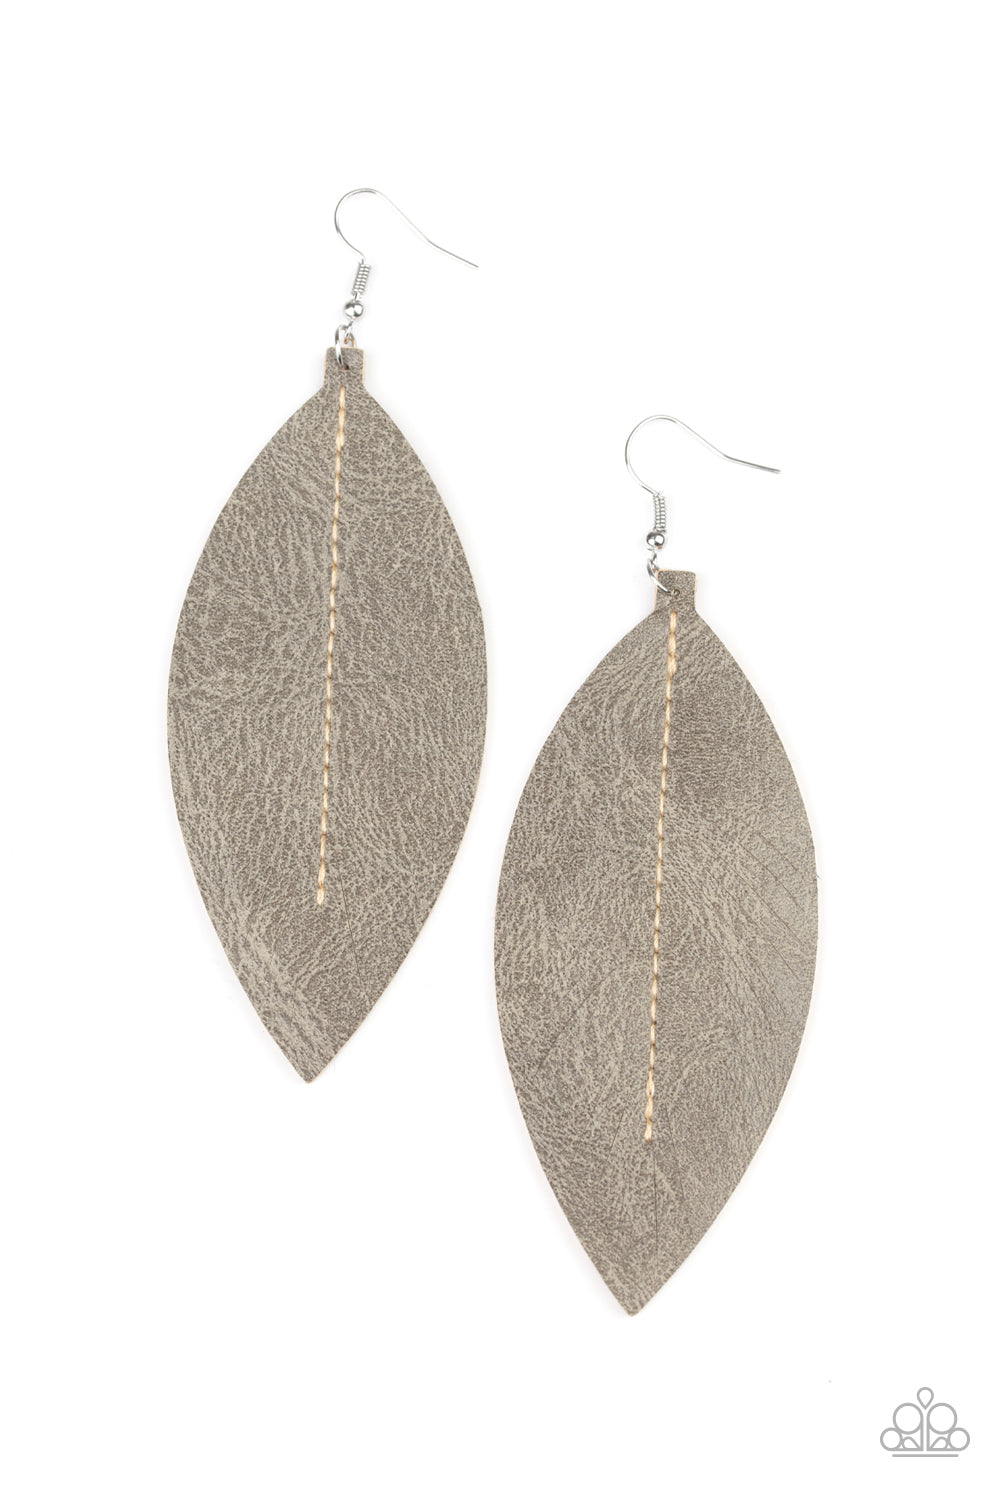 NATURALLY BEAUTIFUL - SILVER LEATHER LEAF EARRINGS